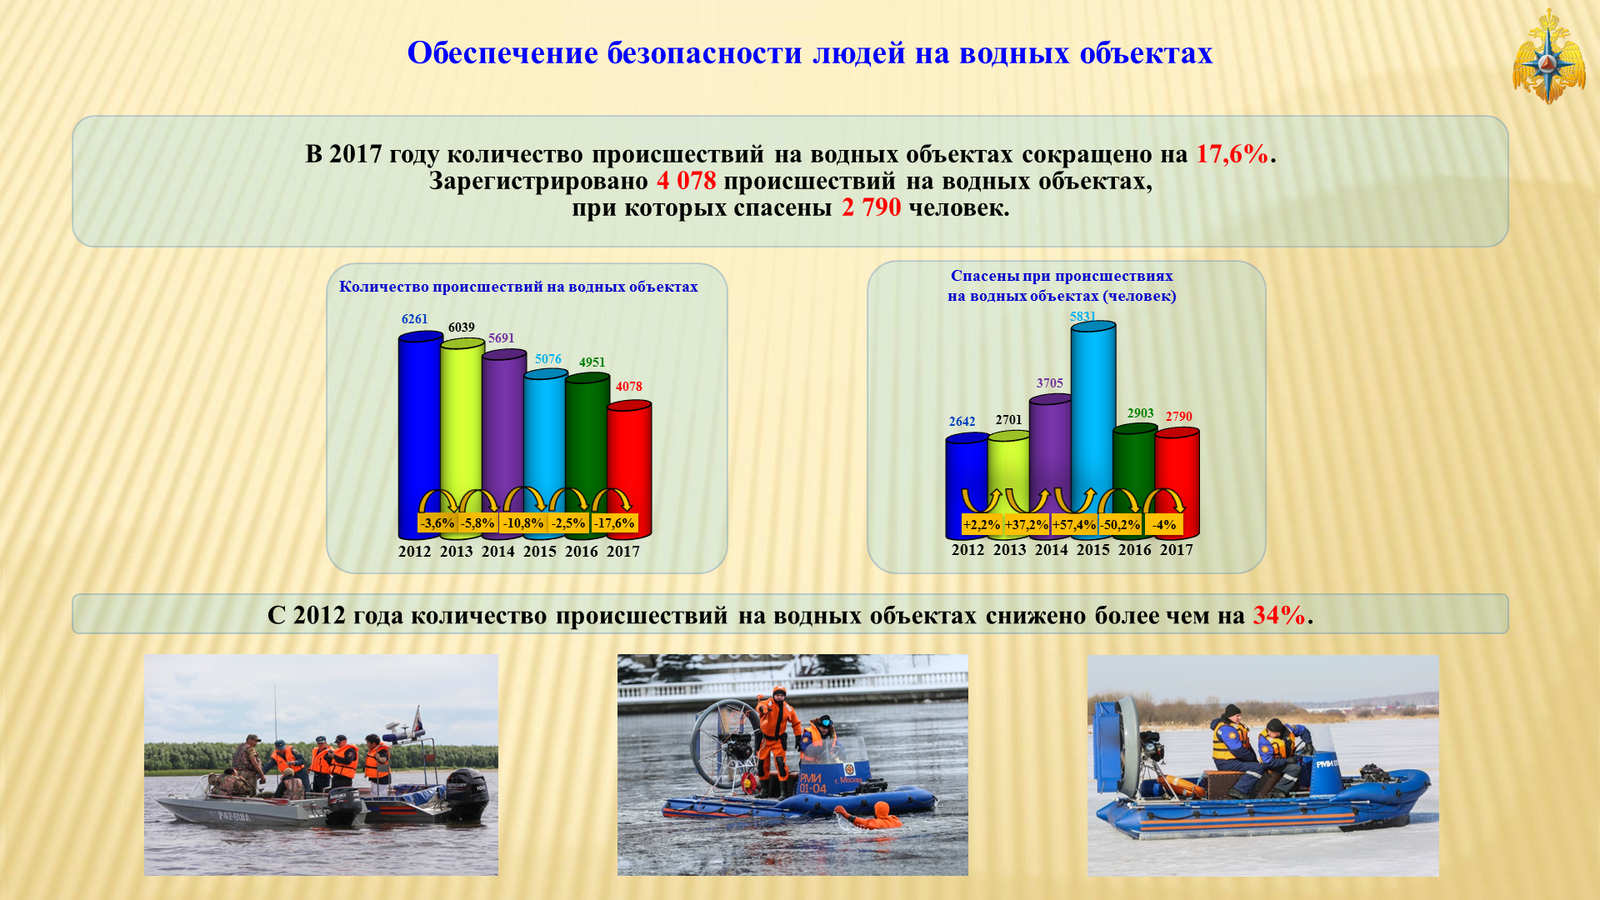 The main indicators of the state of protection of the population and territories of the Russian Federation from emergencies in 2017 - Ministry of Emergency Situations, Outcomes, Emergency, Fire, Road accident, Flood, Protection, The rescue, Longpost